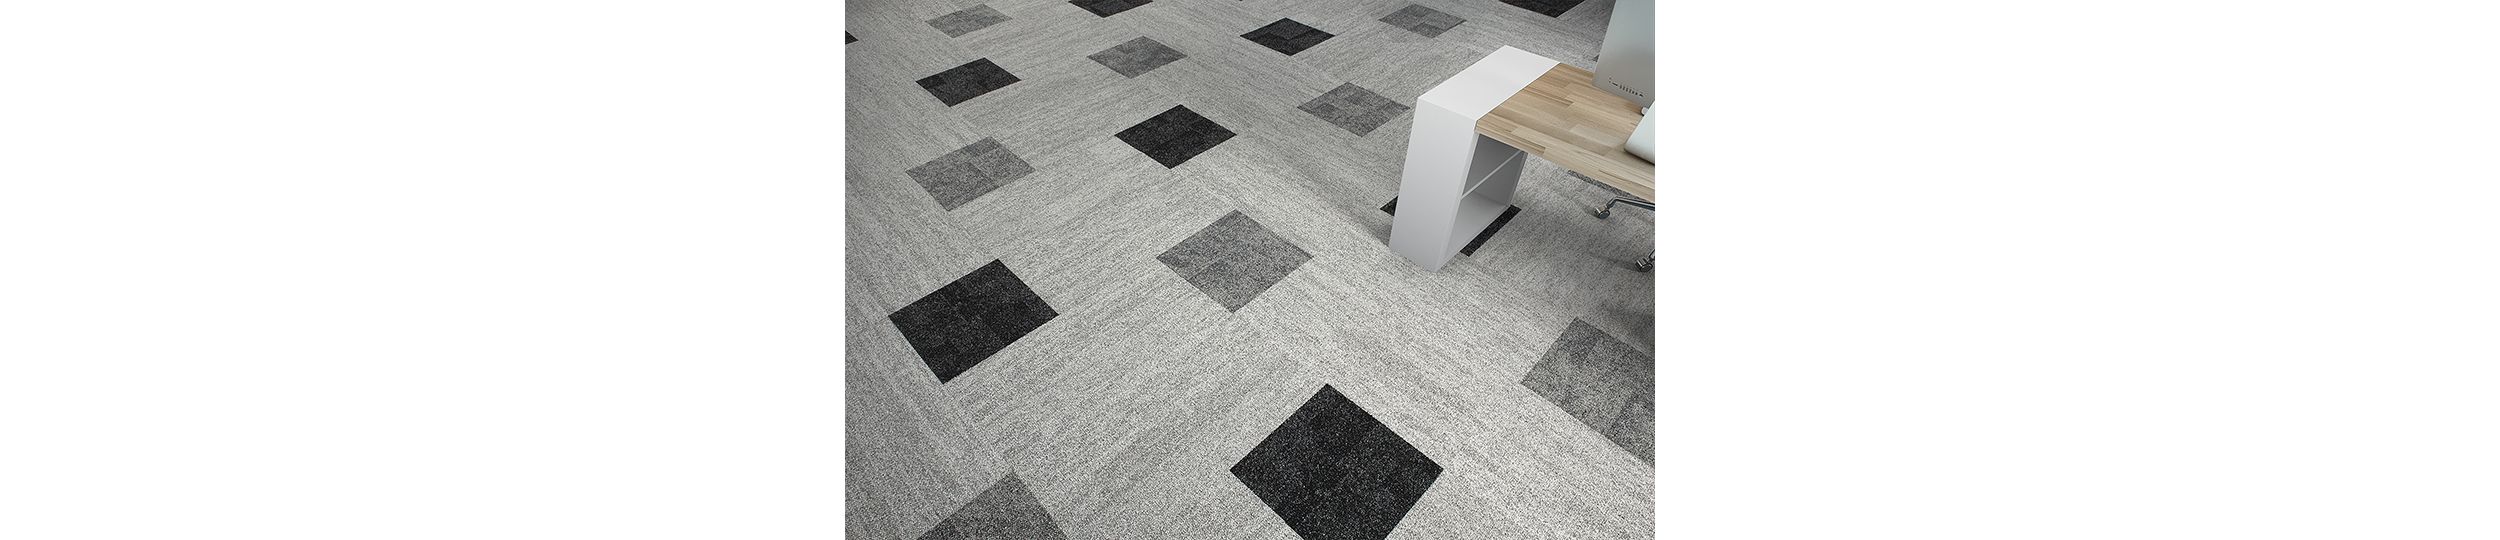 Interface Open Air 402 plank carpet tile in floor view with small workstation off to the right imagen número 3